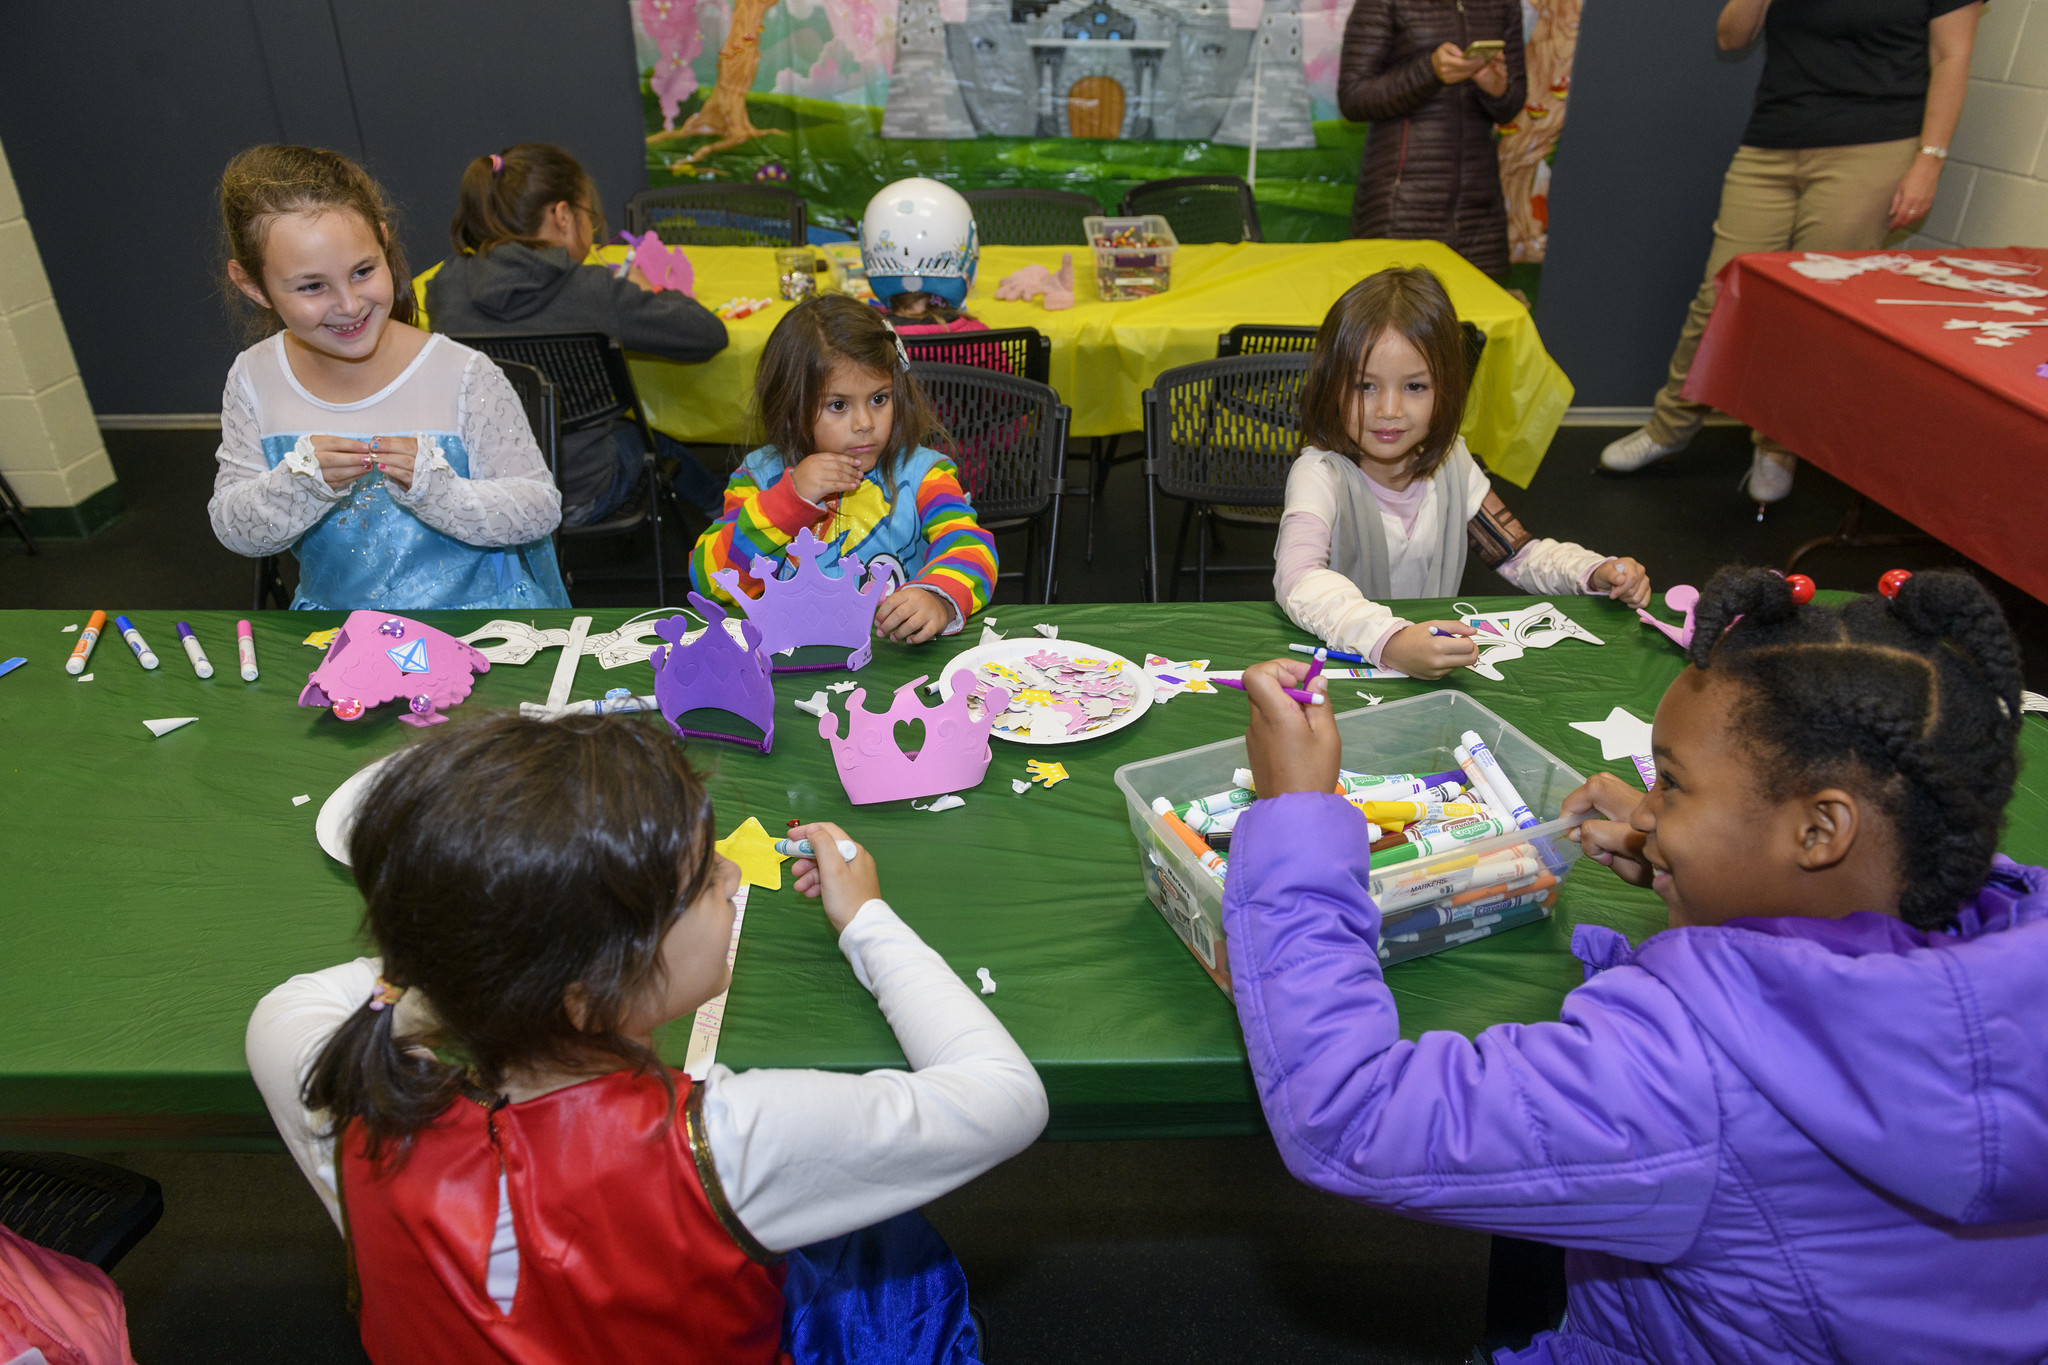 children doing crafts at a table